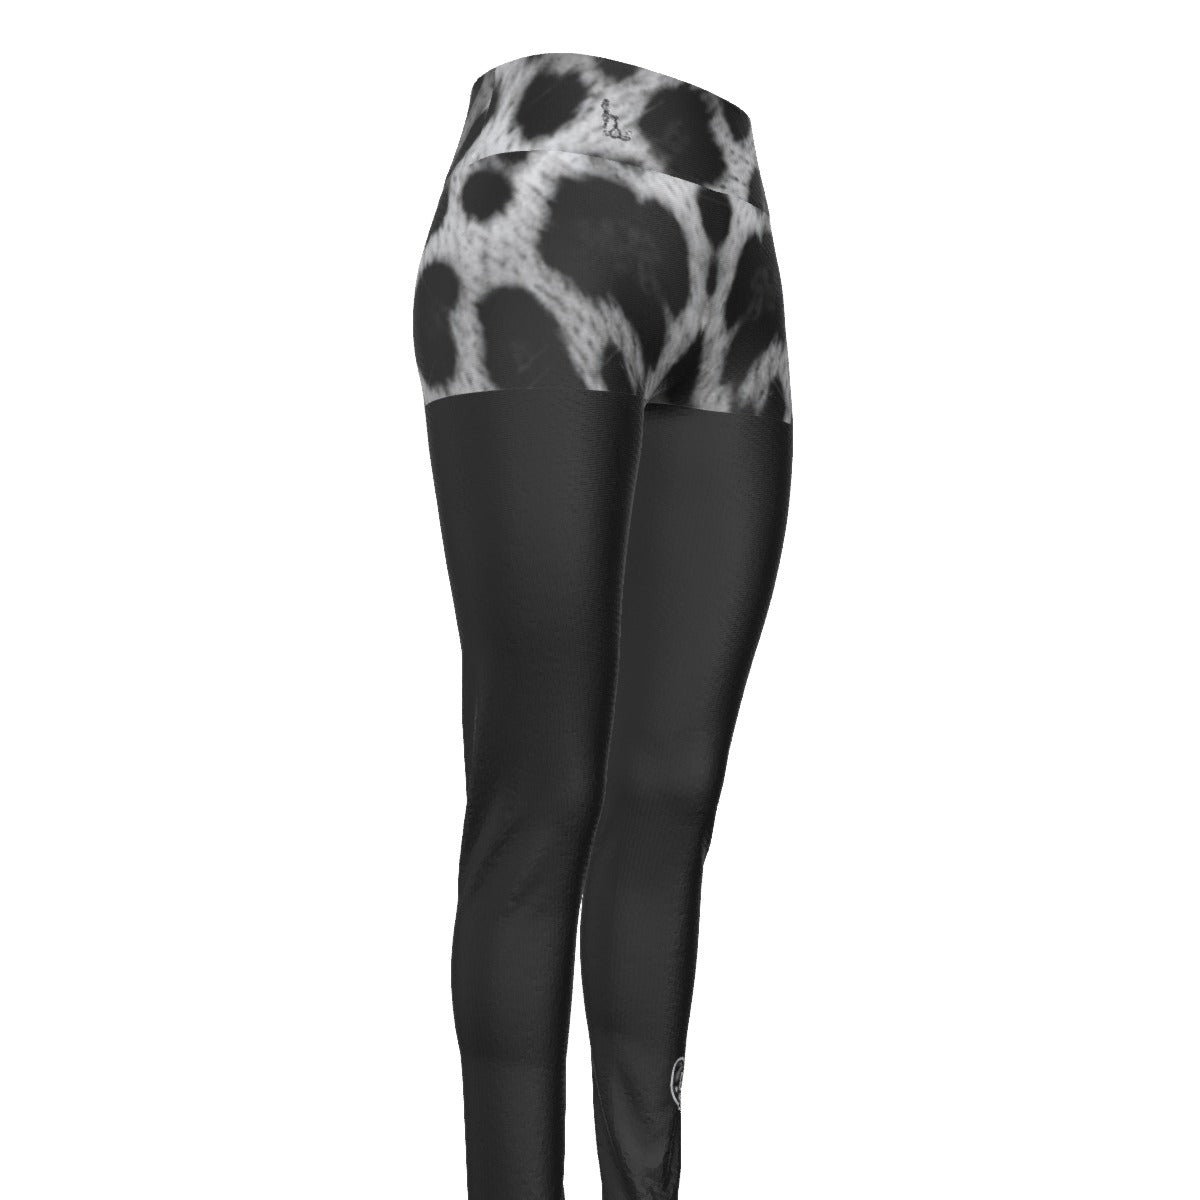  Officially Sexy Snow Leopard Print Collection Women's Black AOP High Waist Booty Popper Leggings #2 (English) 2